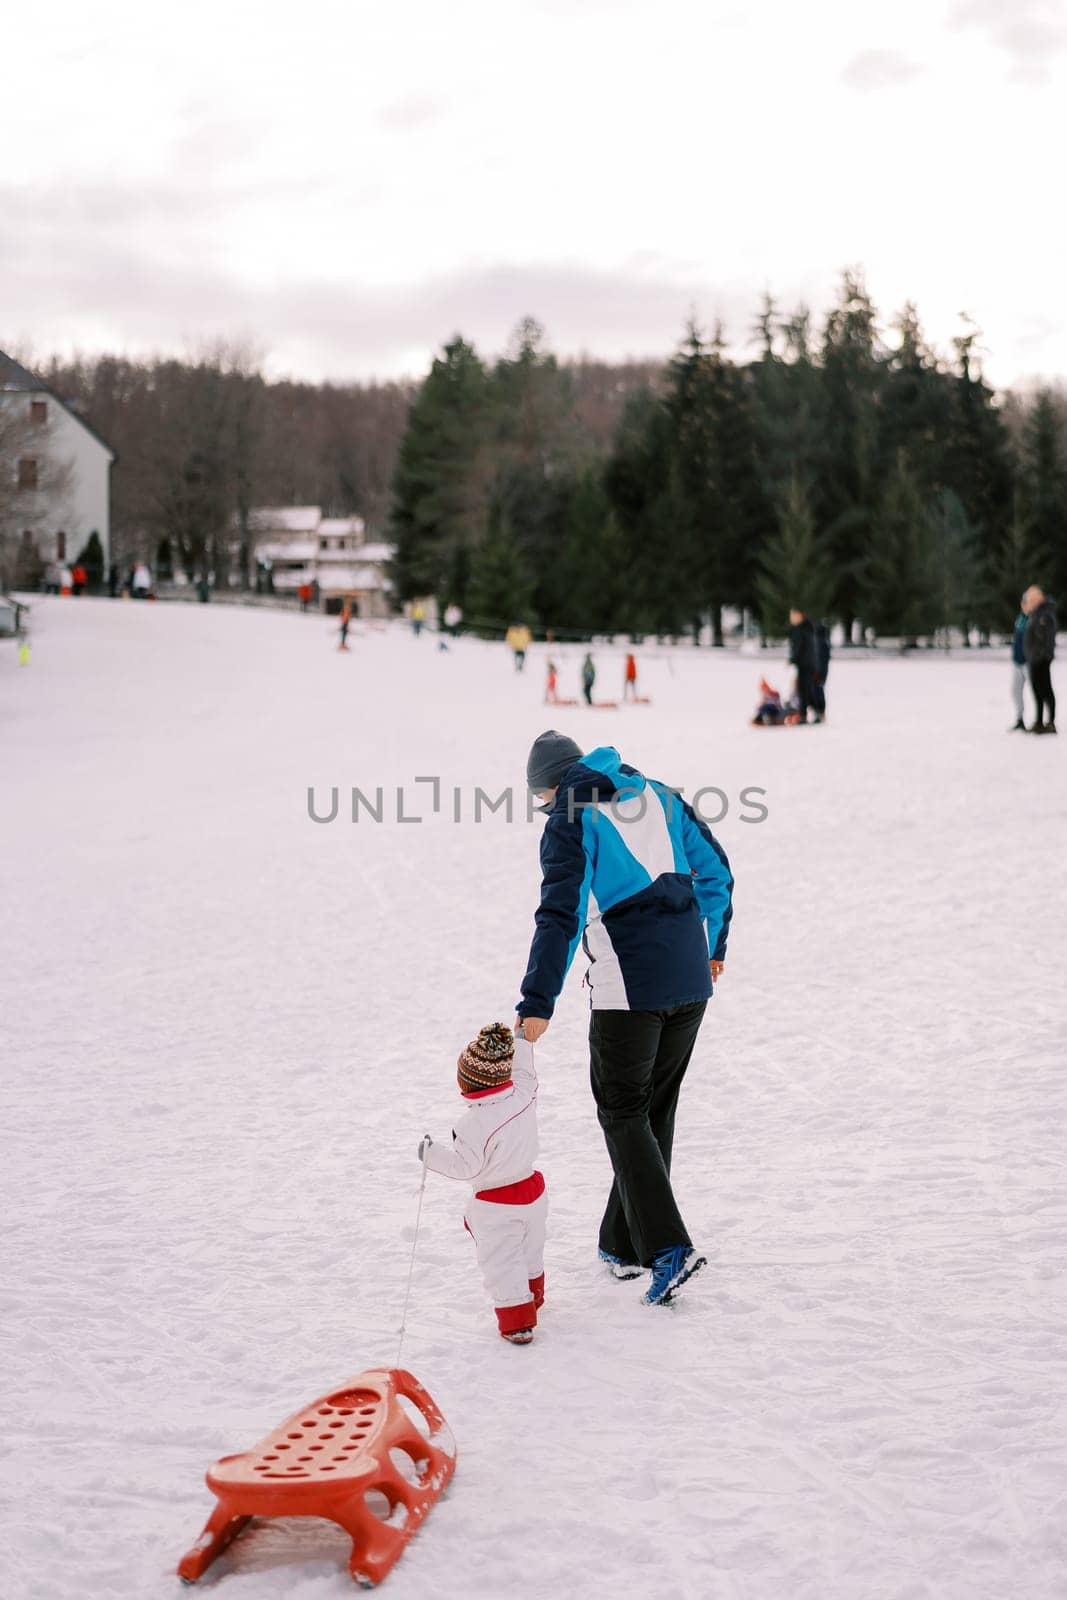 Dad leads by the hand a small child pulling a sled across a snowy plain. Back view by Nadtochiy